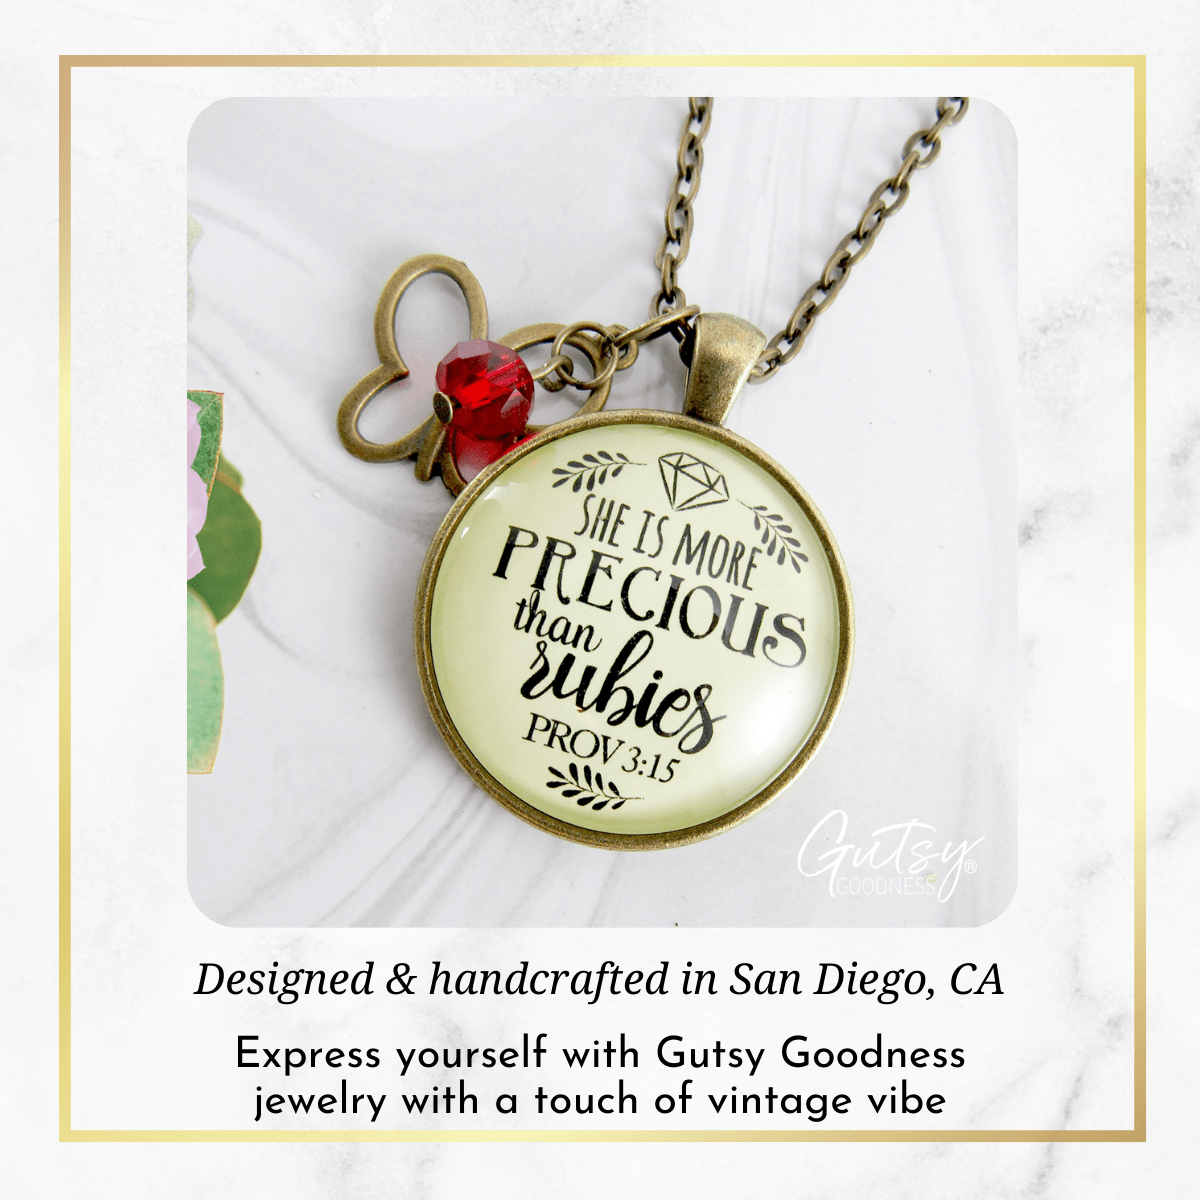 She More Precious Rubies Necklace Fashion Faith Inspire Jewelry Cherished Woman 36" - Gutsy Goodness Handmade Jewelry;She More Precious Rubies Necklace Fashion Faith Inspire Jewelry Cherished Woman 36" - Gutsy Goodness Handmade Jewelry Gifts